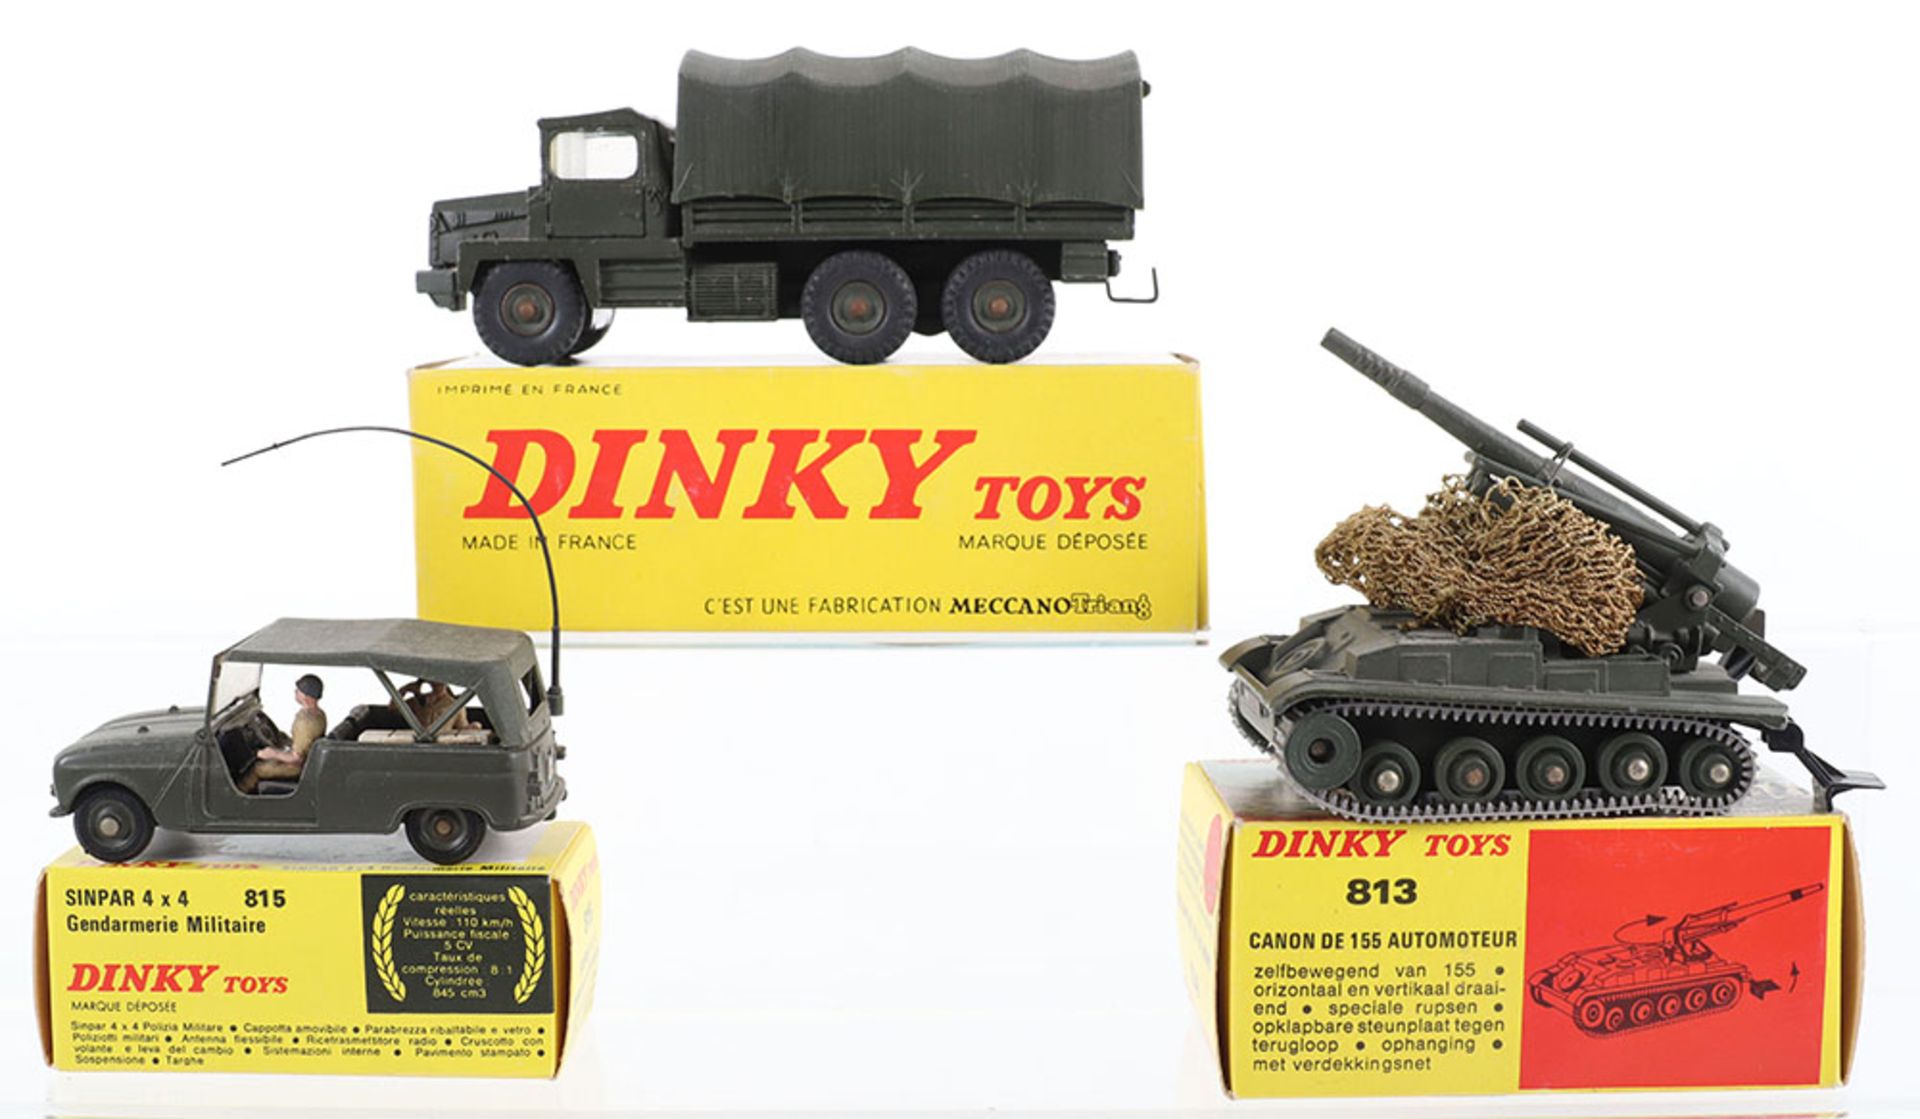 French Dinky Toys 824 Gazelle Berliet Army Truck - Image 2 of 2